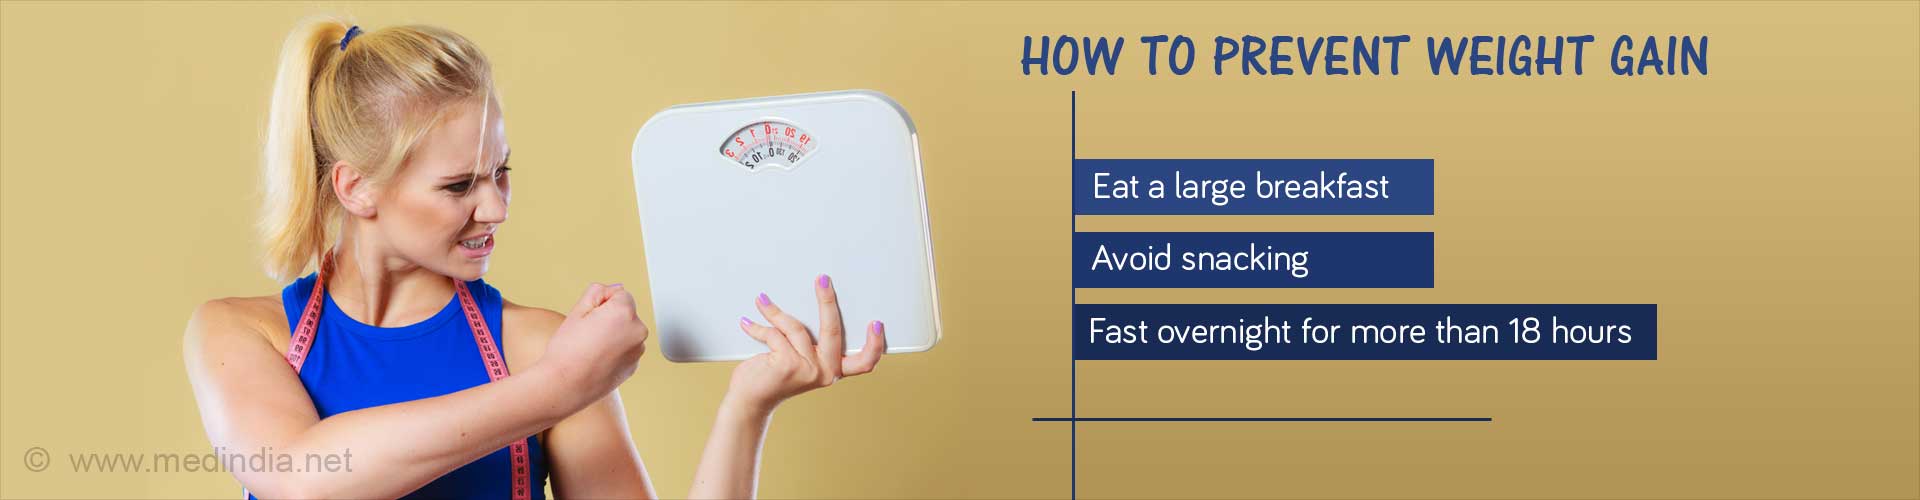 How to Prevent Weight Gain
- Eat a large breakfast
- Avoid snacking
- Fast overnight for more than 18 hours